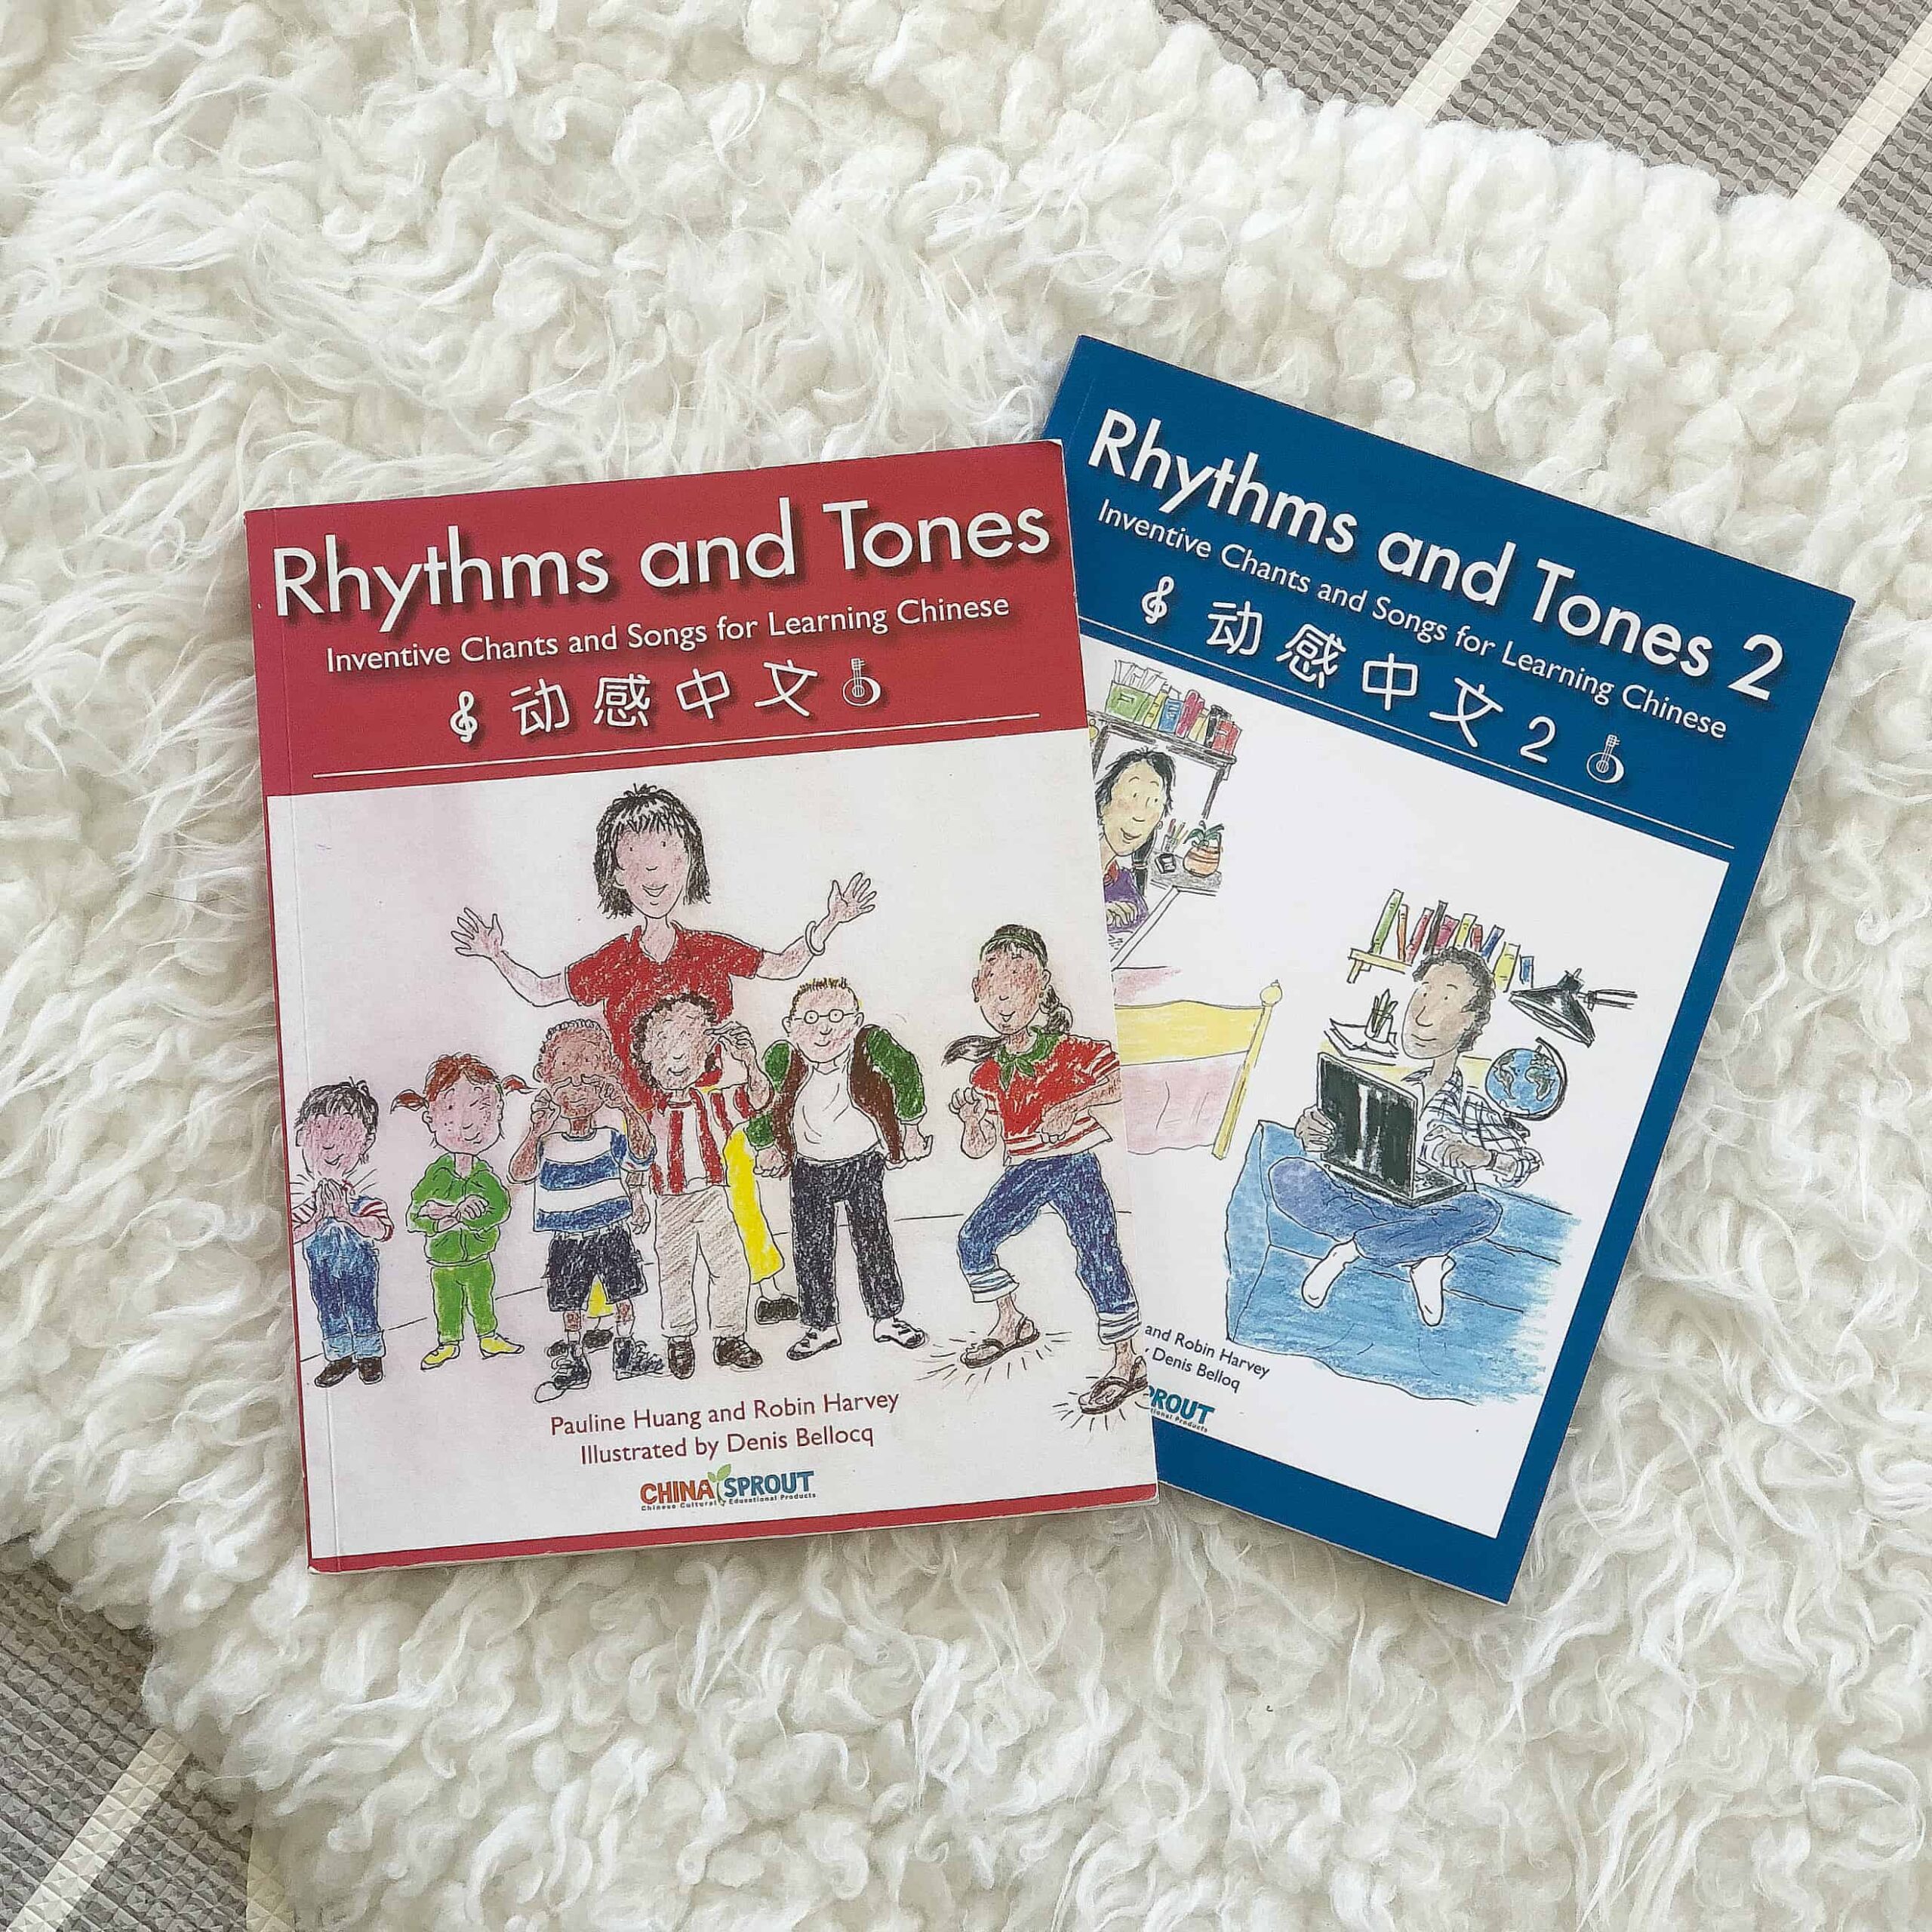 Rhythm and Tones: Inventive Chants and Songs for Learning Chinese